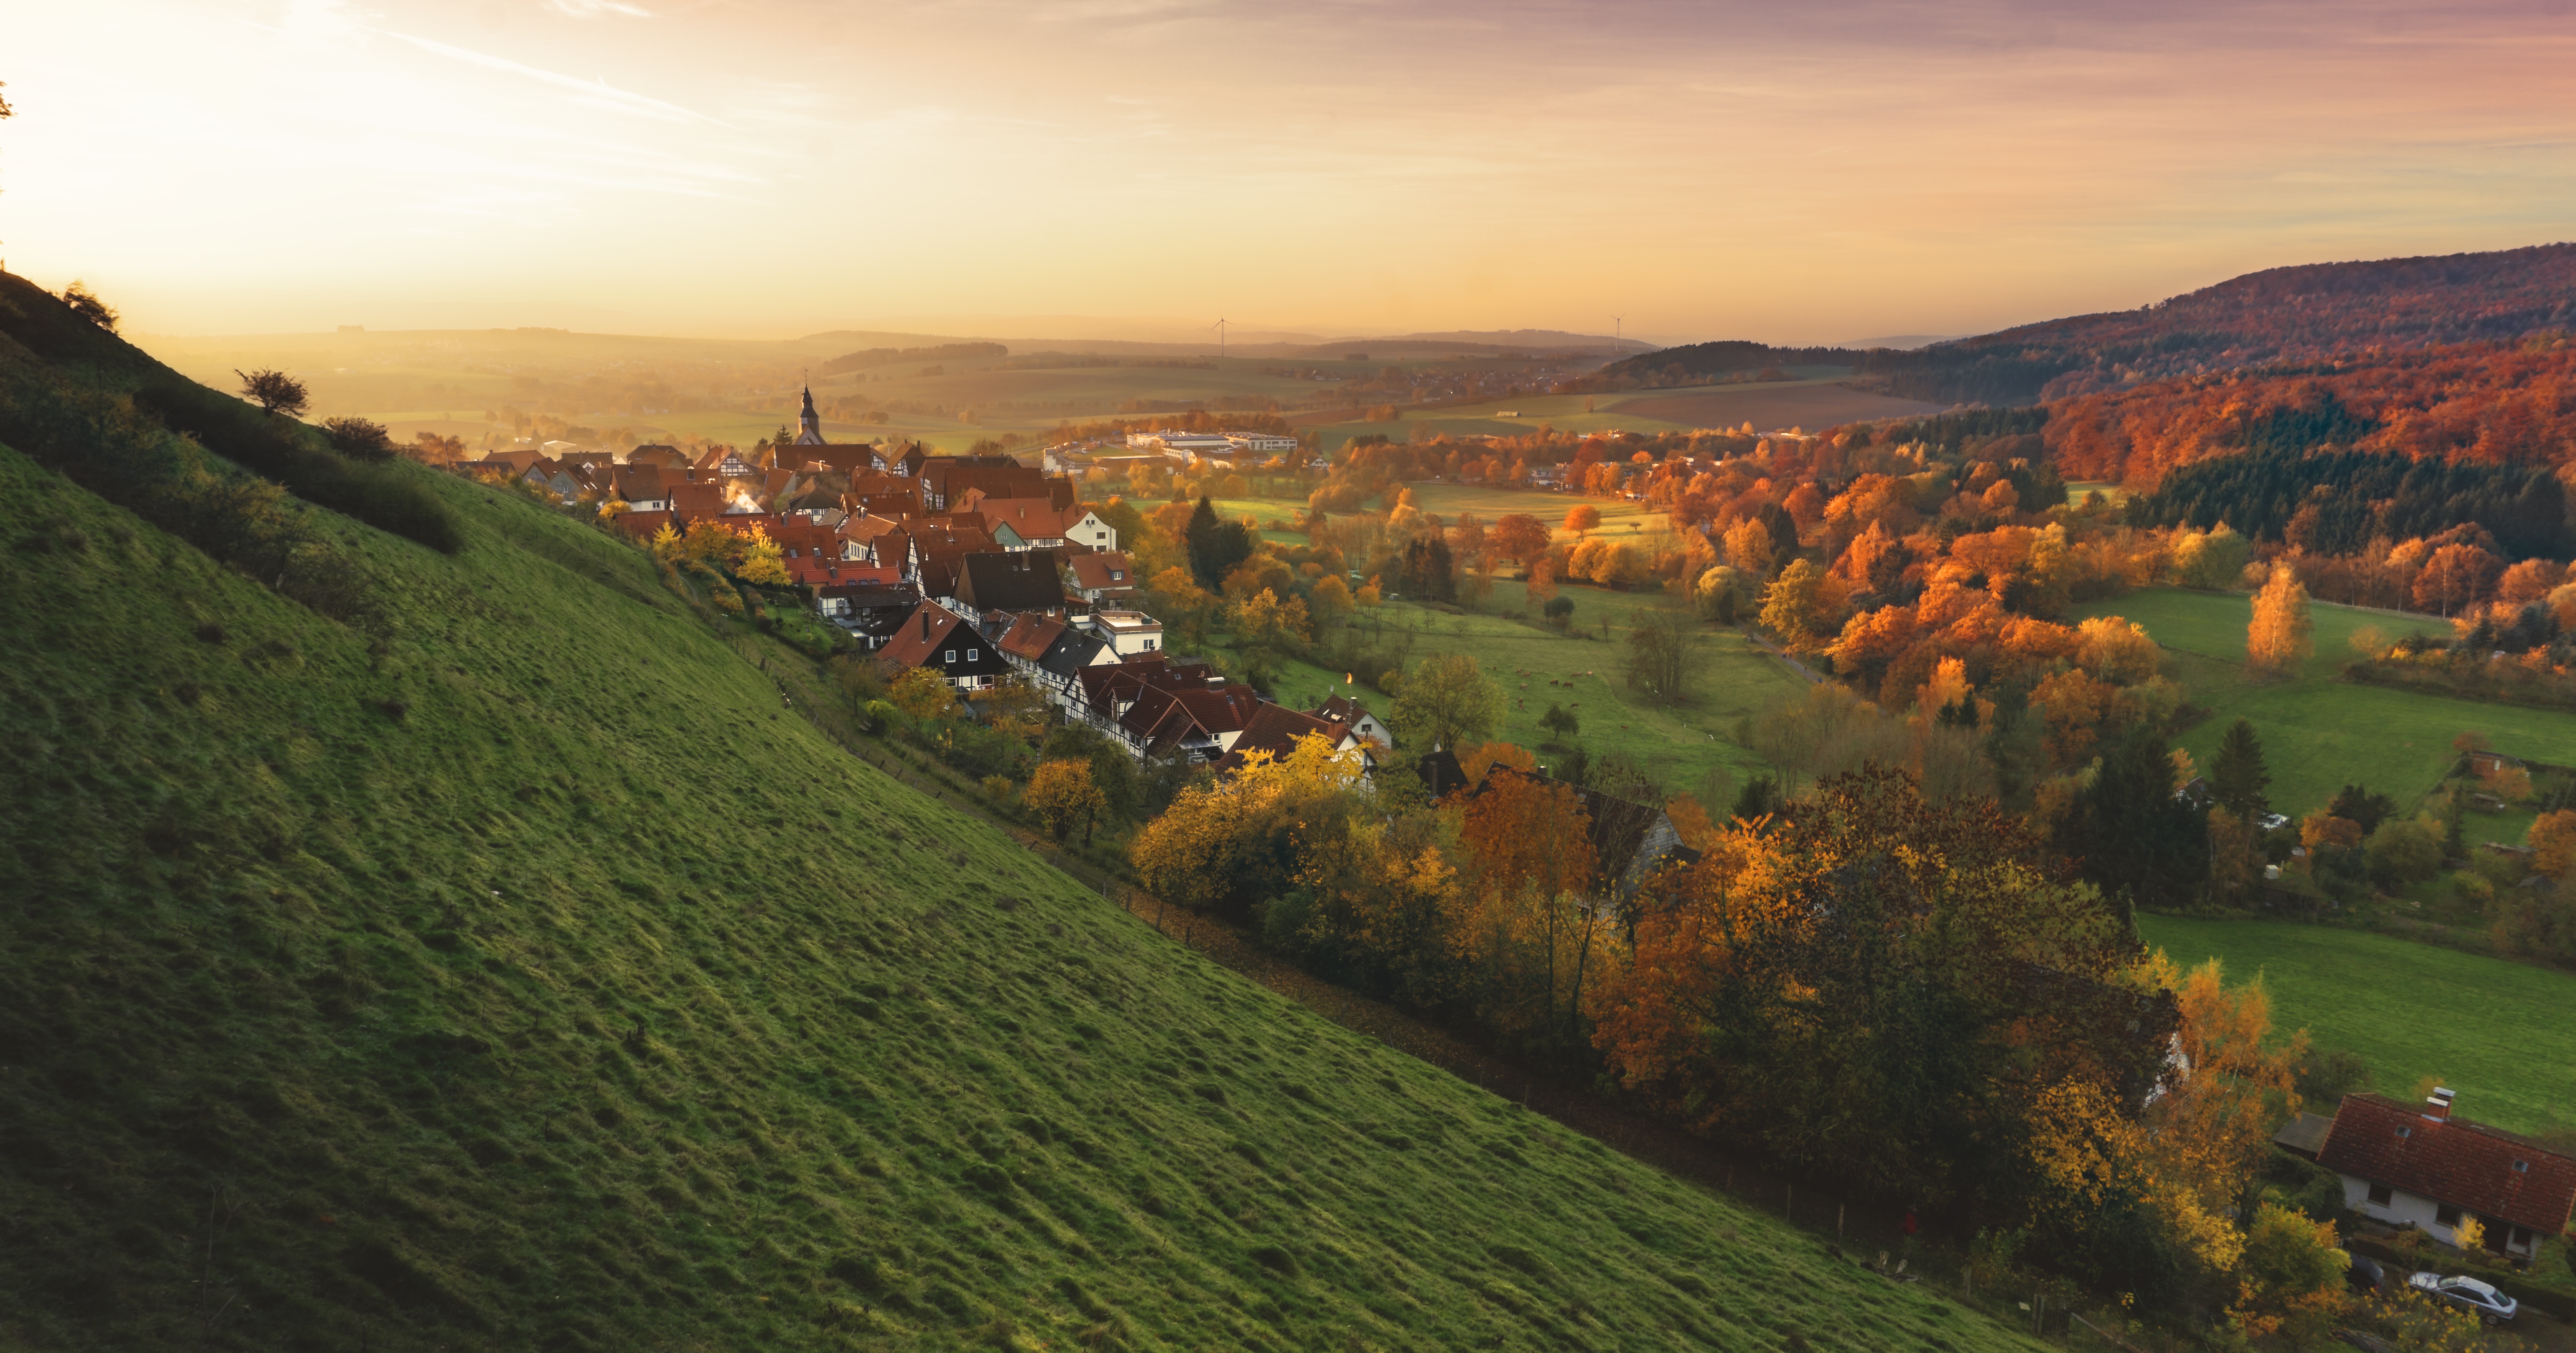 Great landscape of the valley in Germany image - Free stock photo